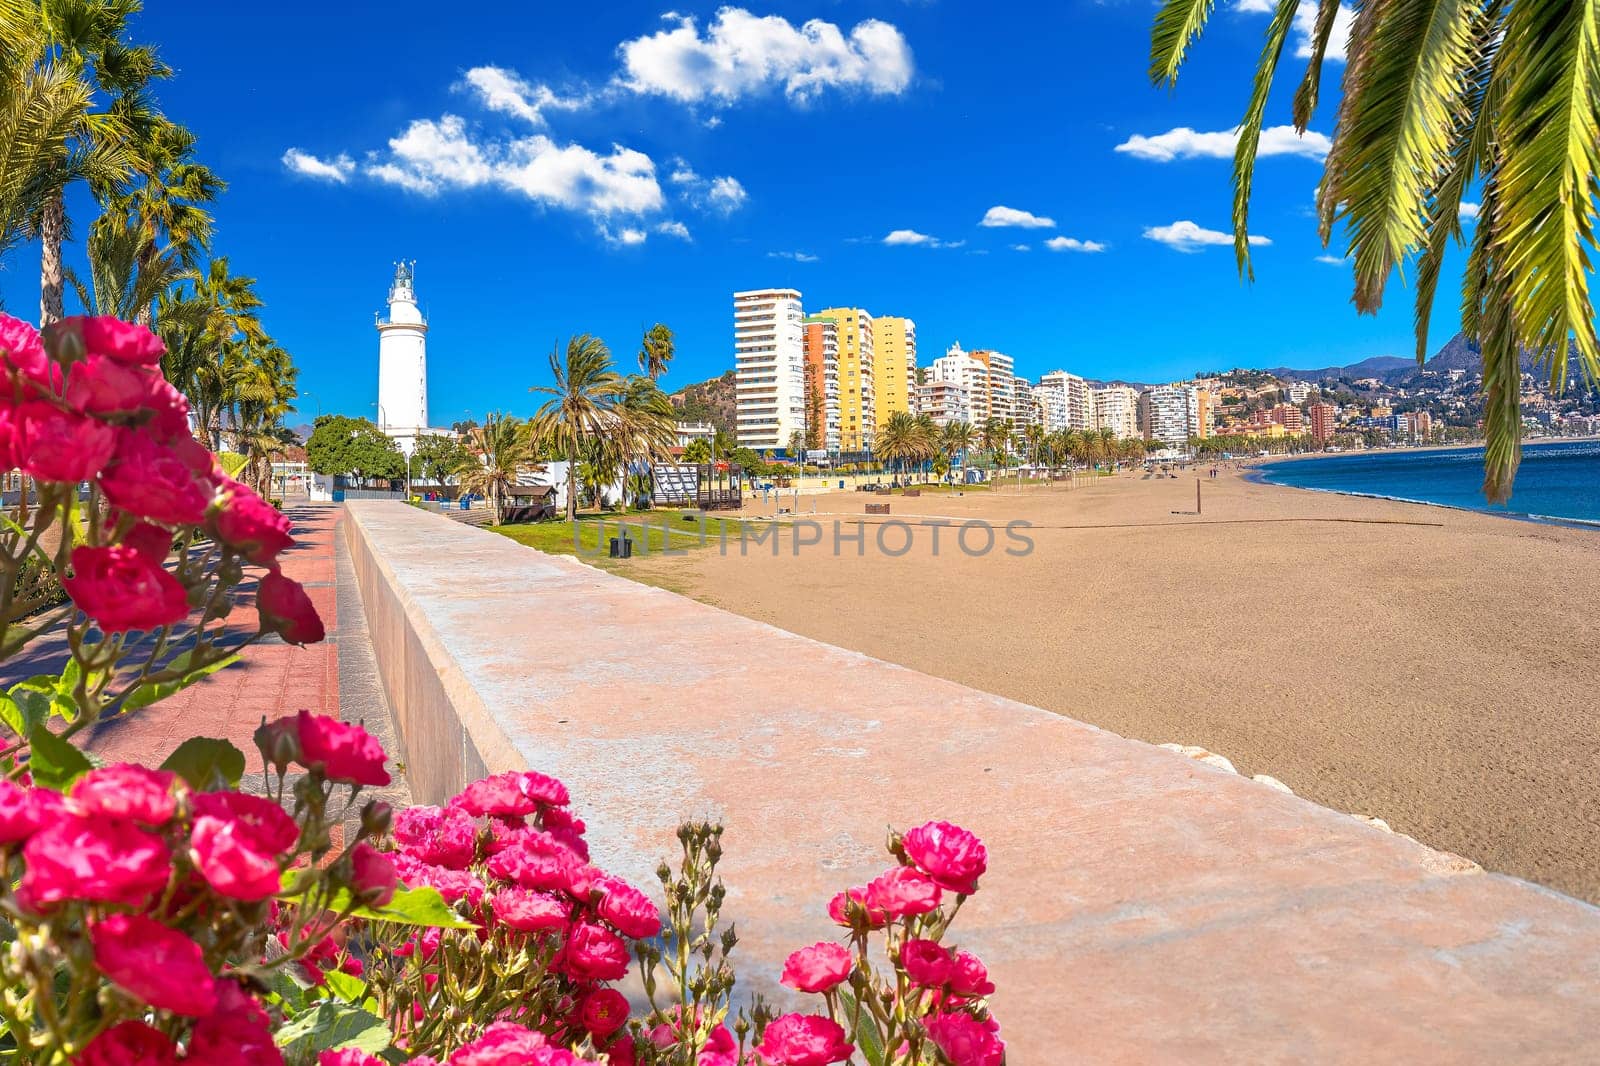 Malaga beach and lighthouse panoramic view by xbrchx